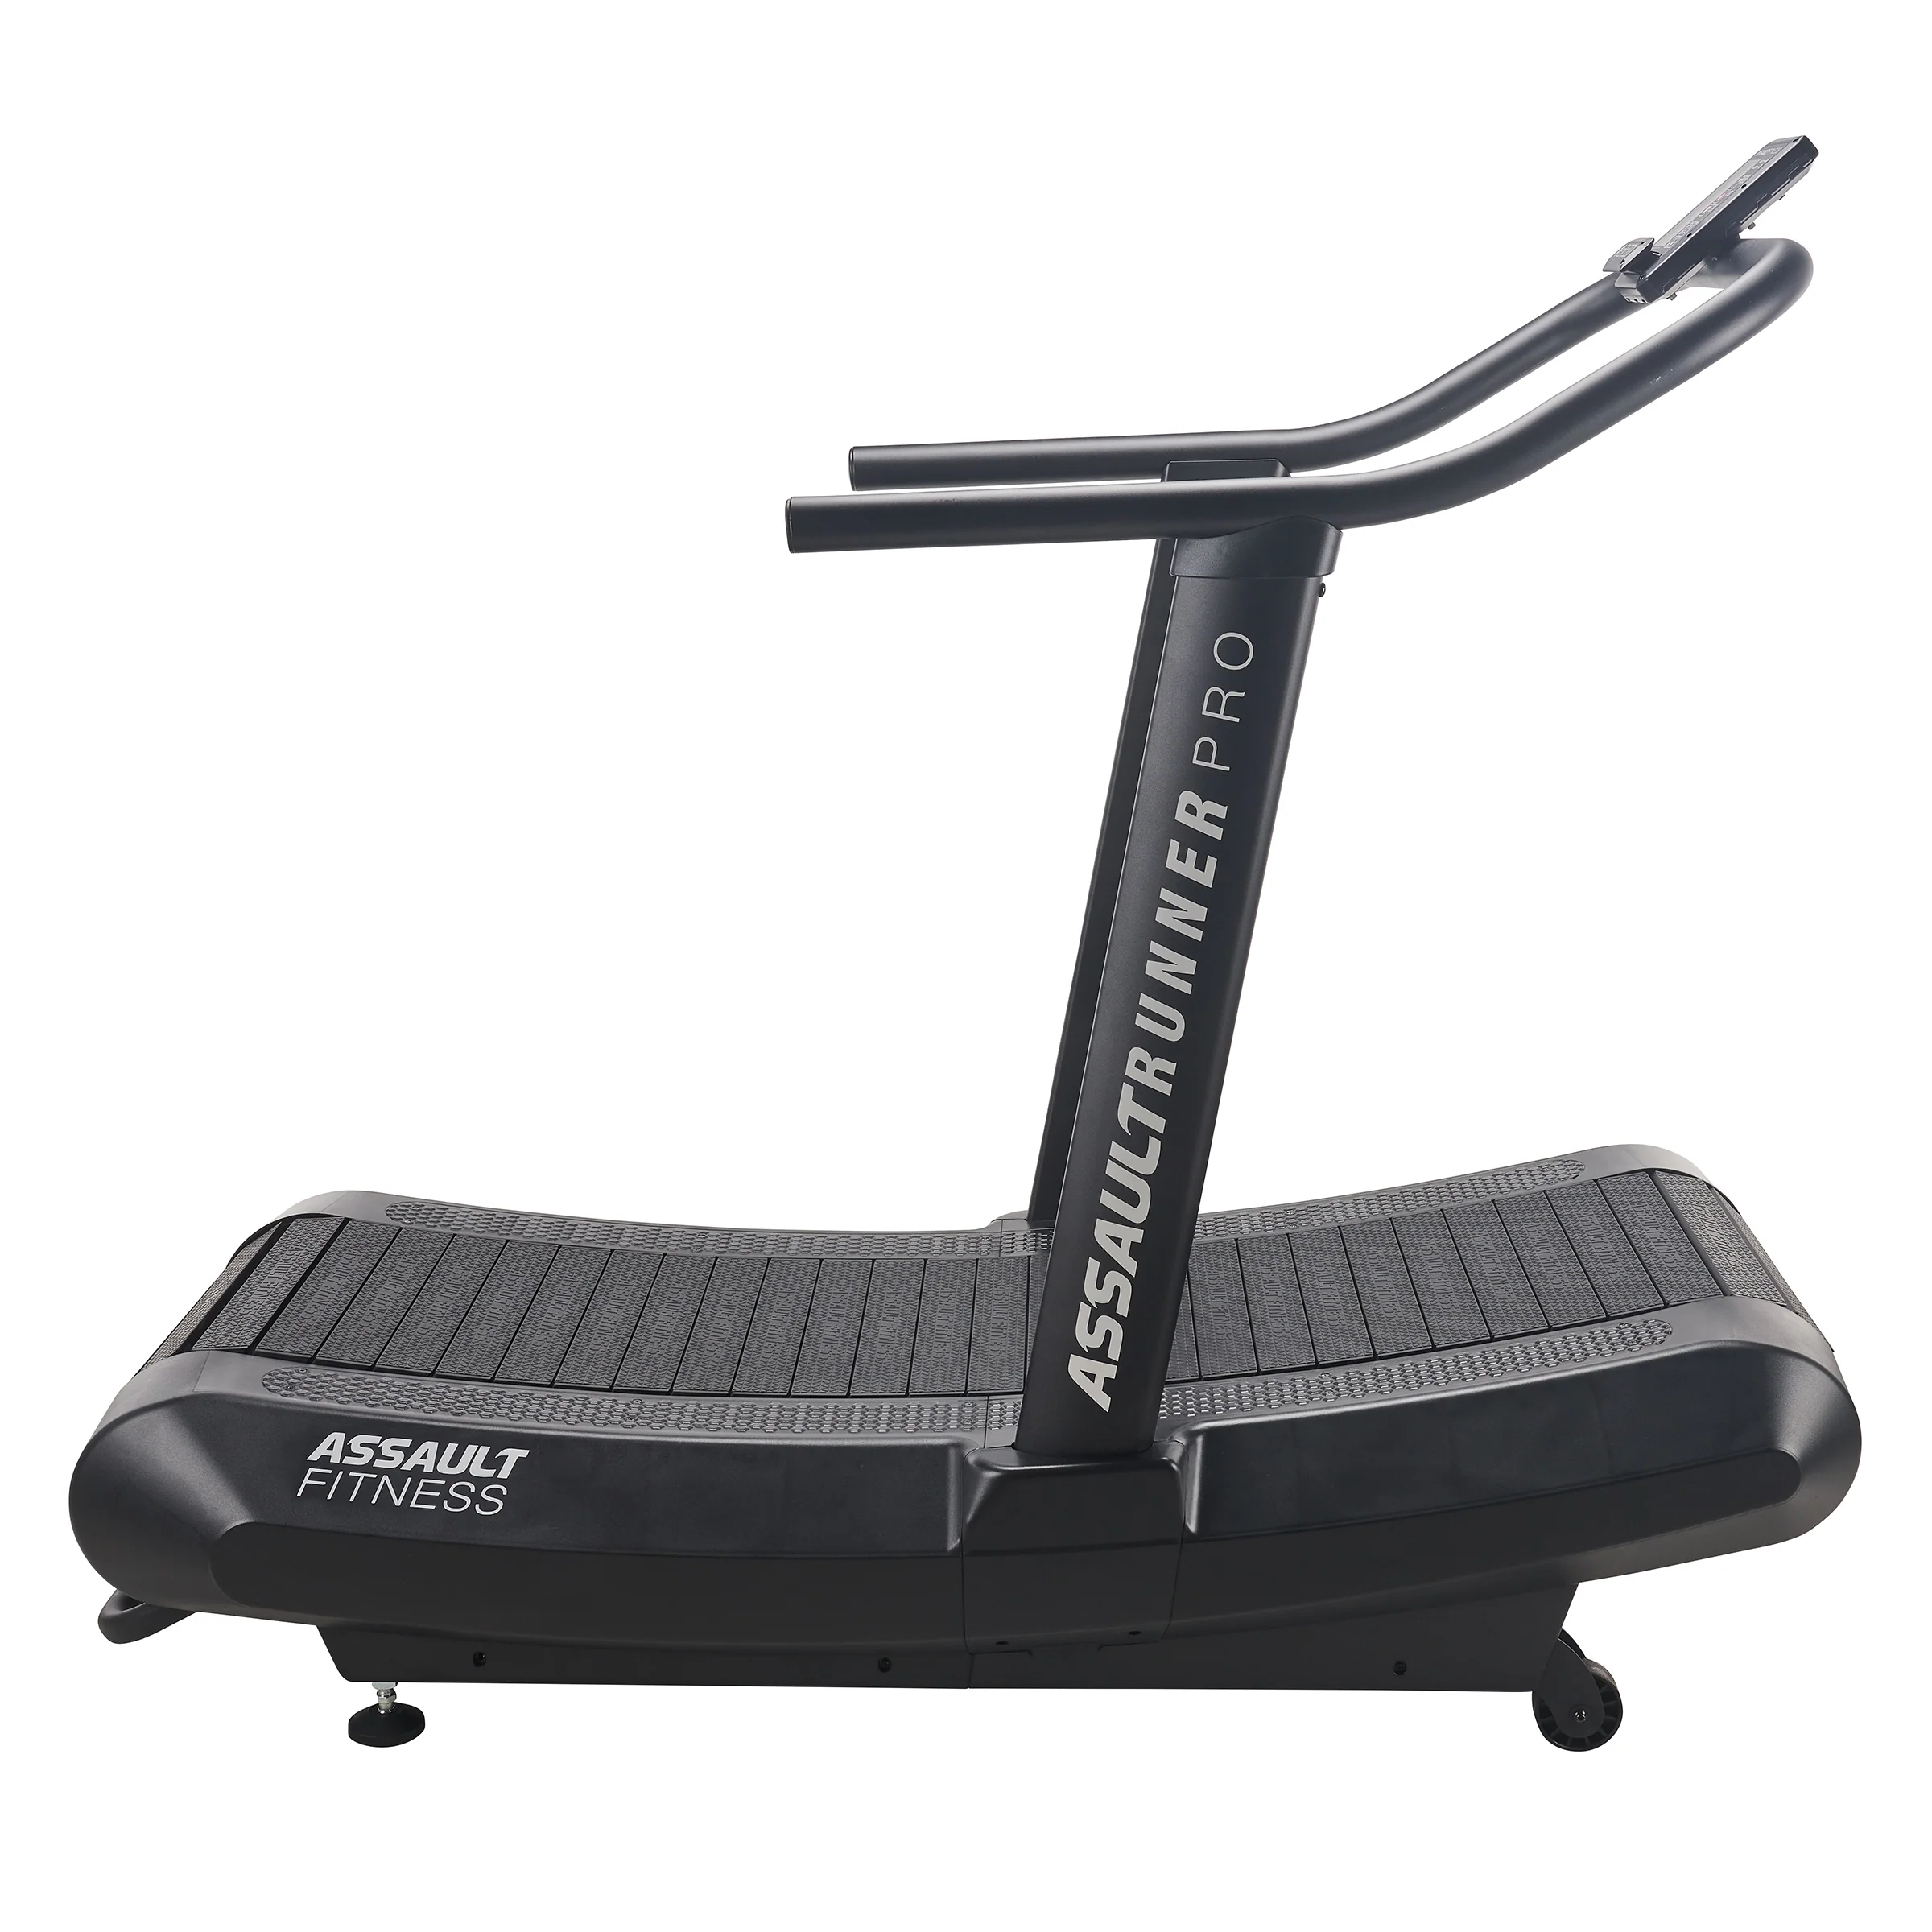 
Do Treadmills Come Assembled? Here's What You Need To Know